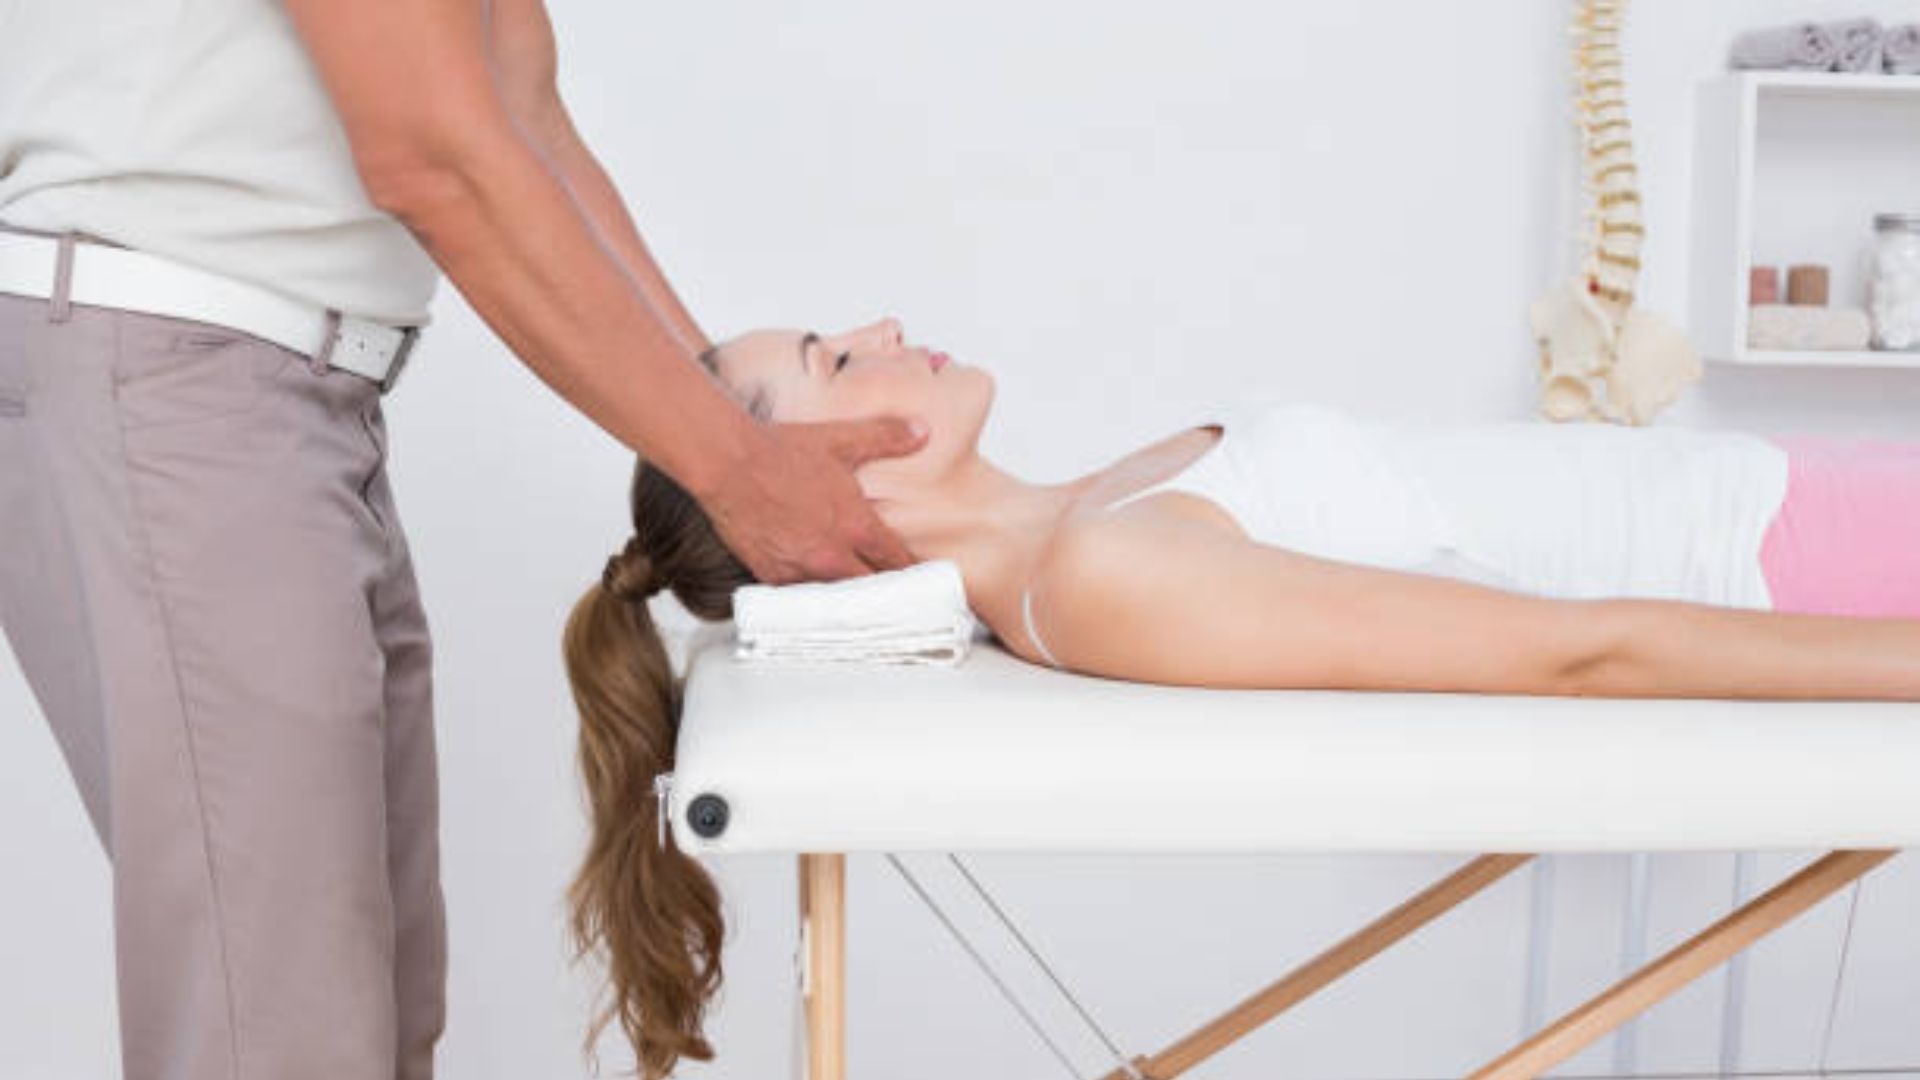 Chiropractor Performing A Neck Adjustment On A Patient